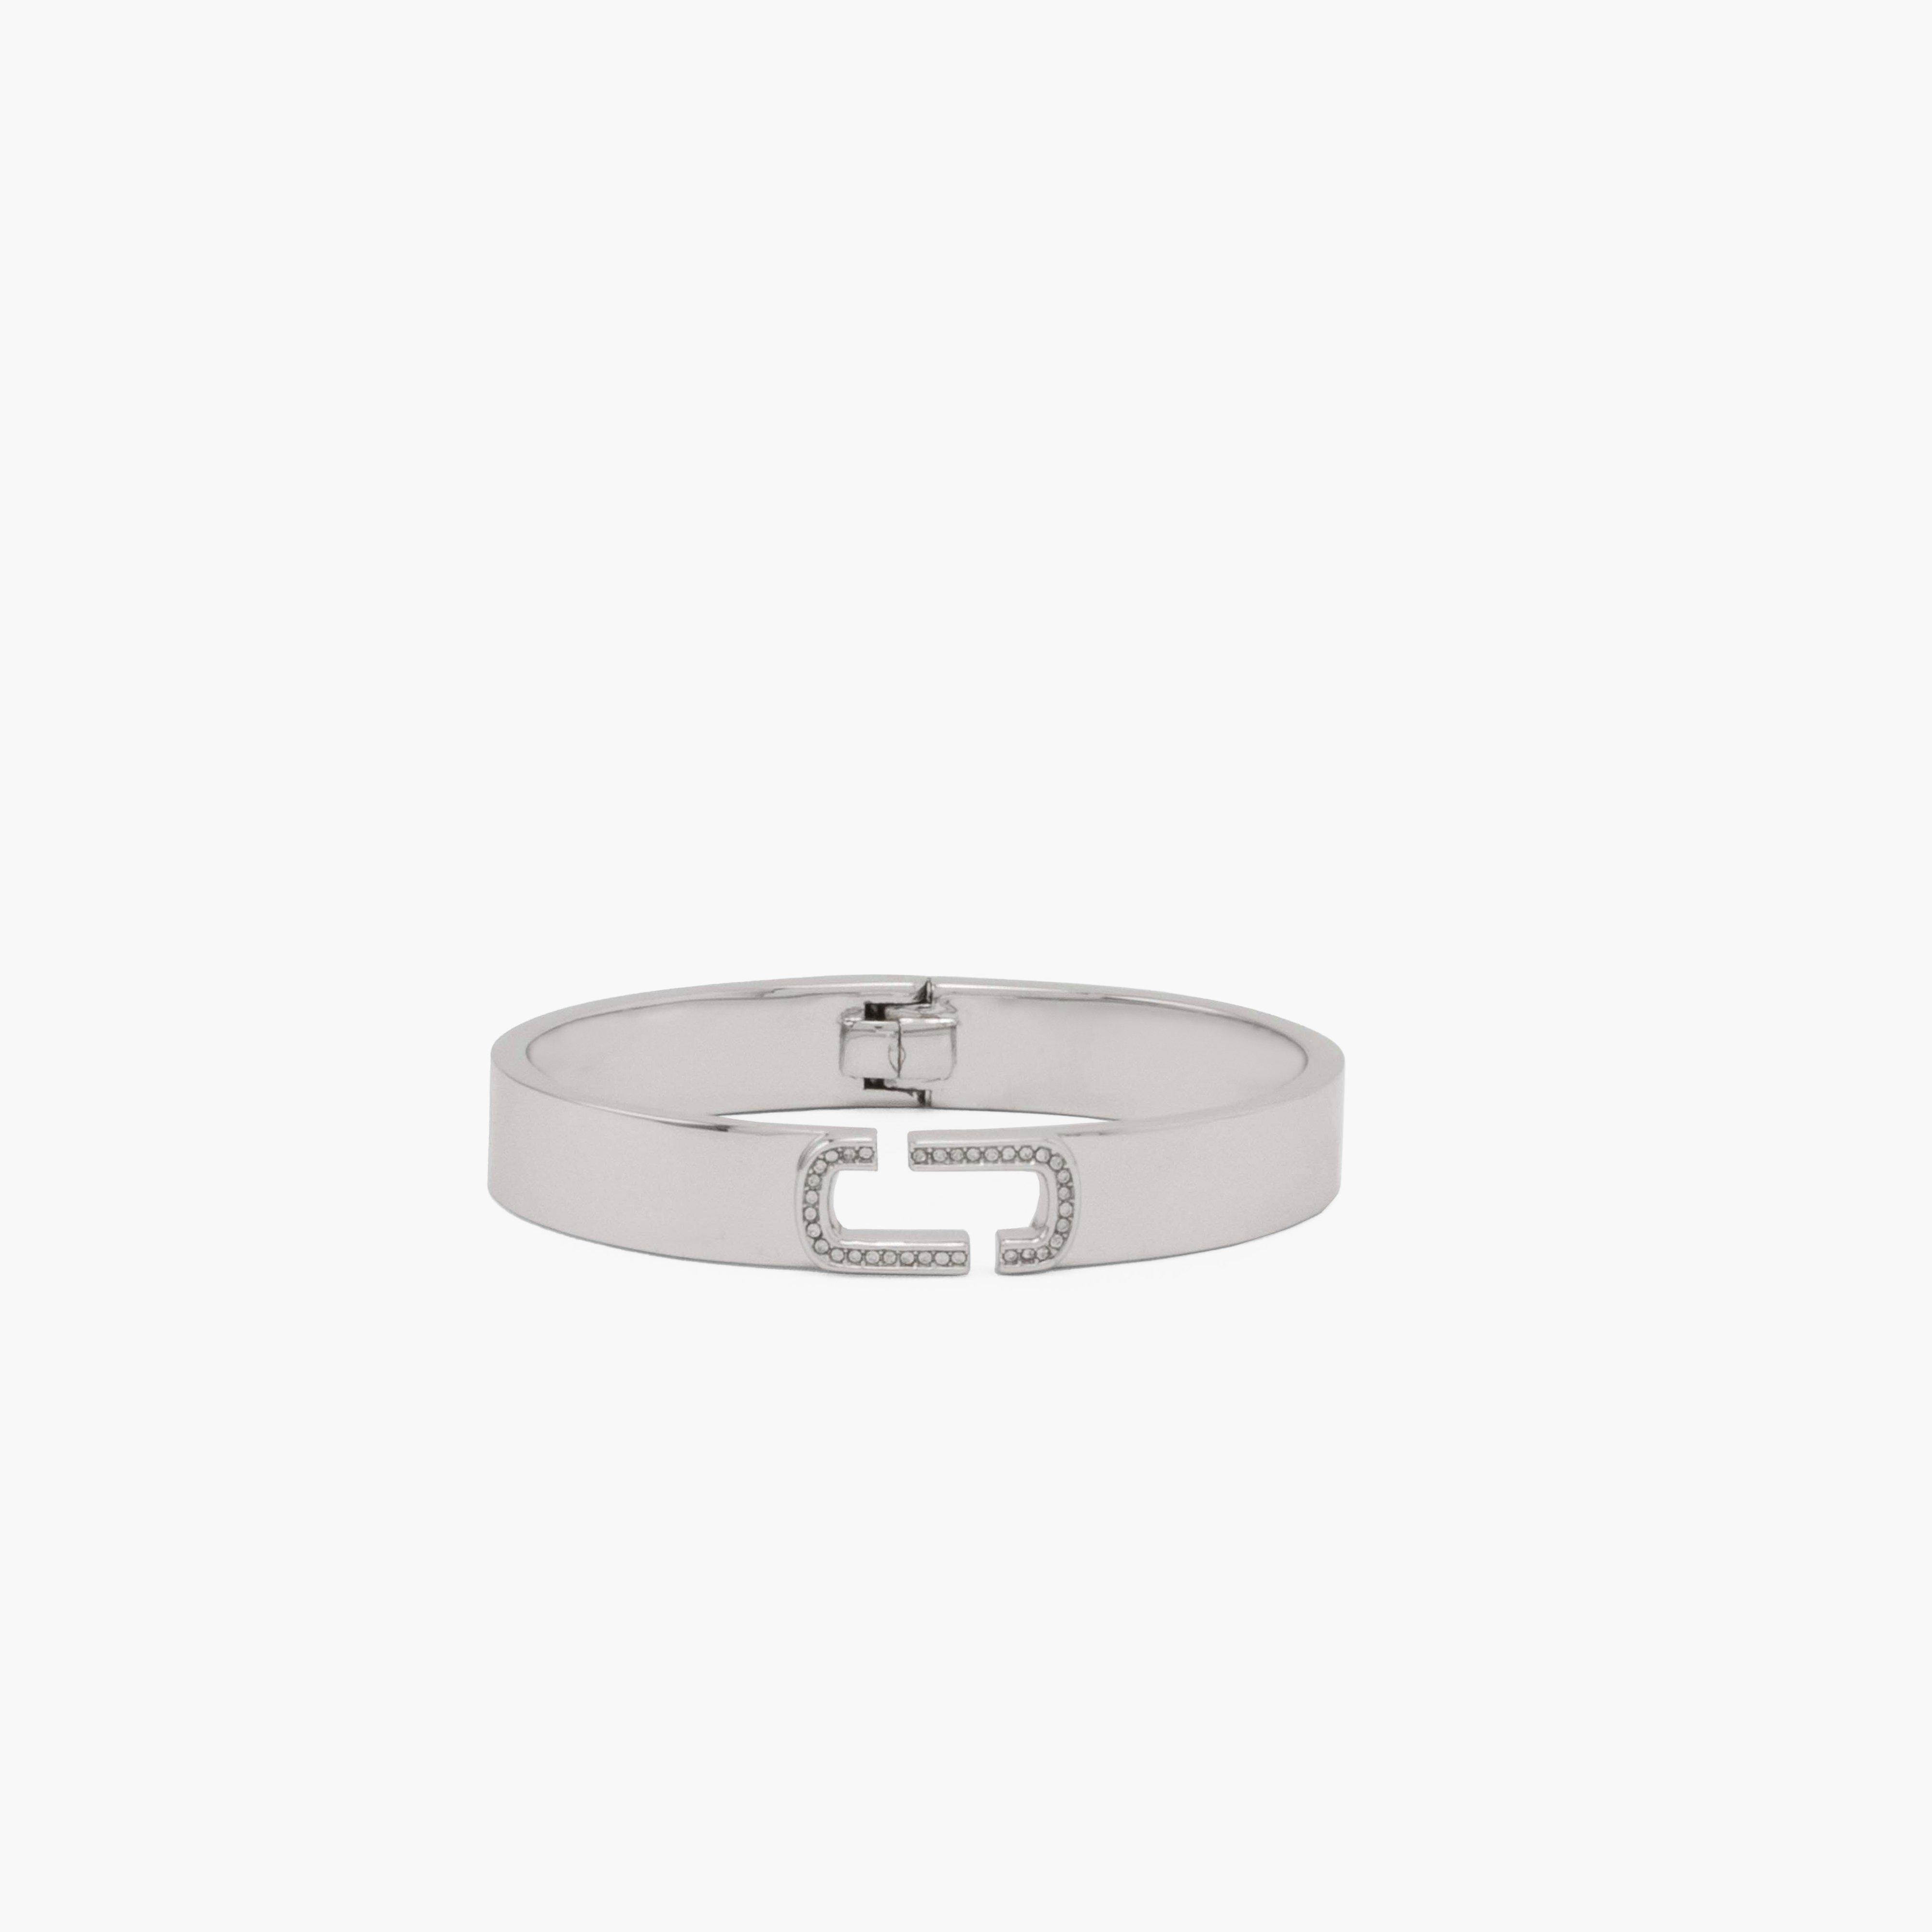 Marc by Marc jacobs The J Marc Crystal Bangle,CRYSTAL/SILVER